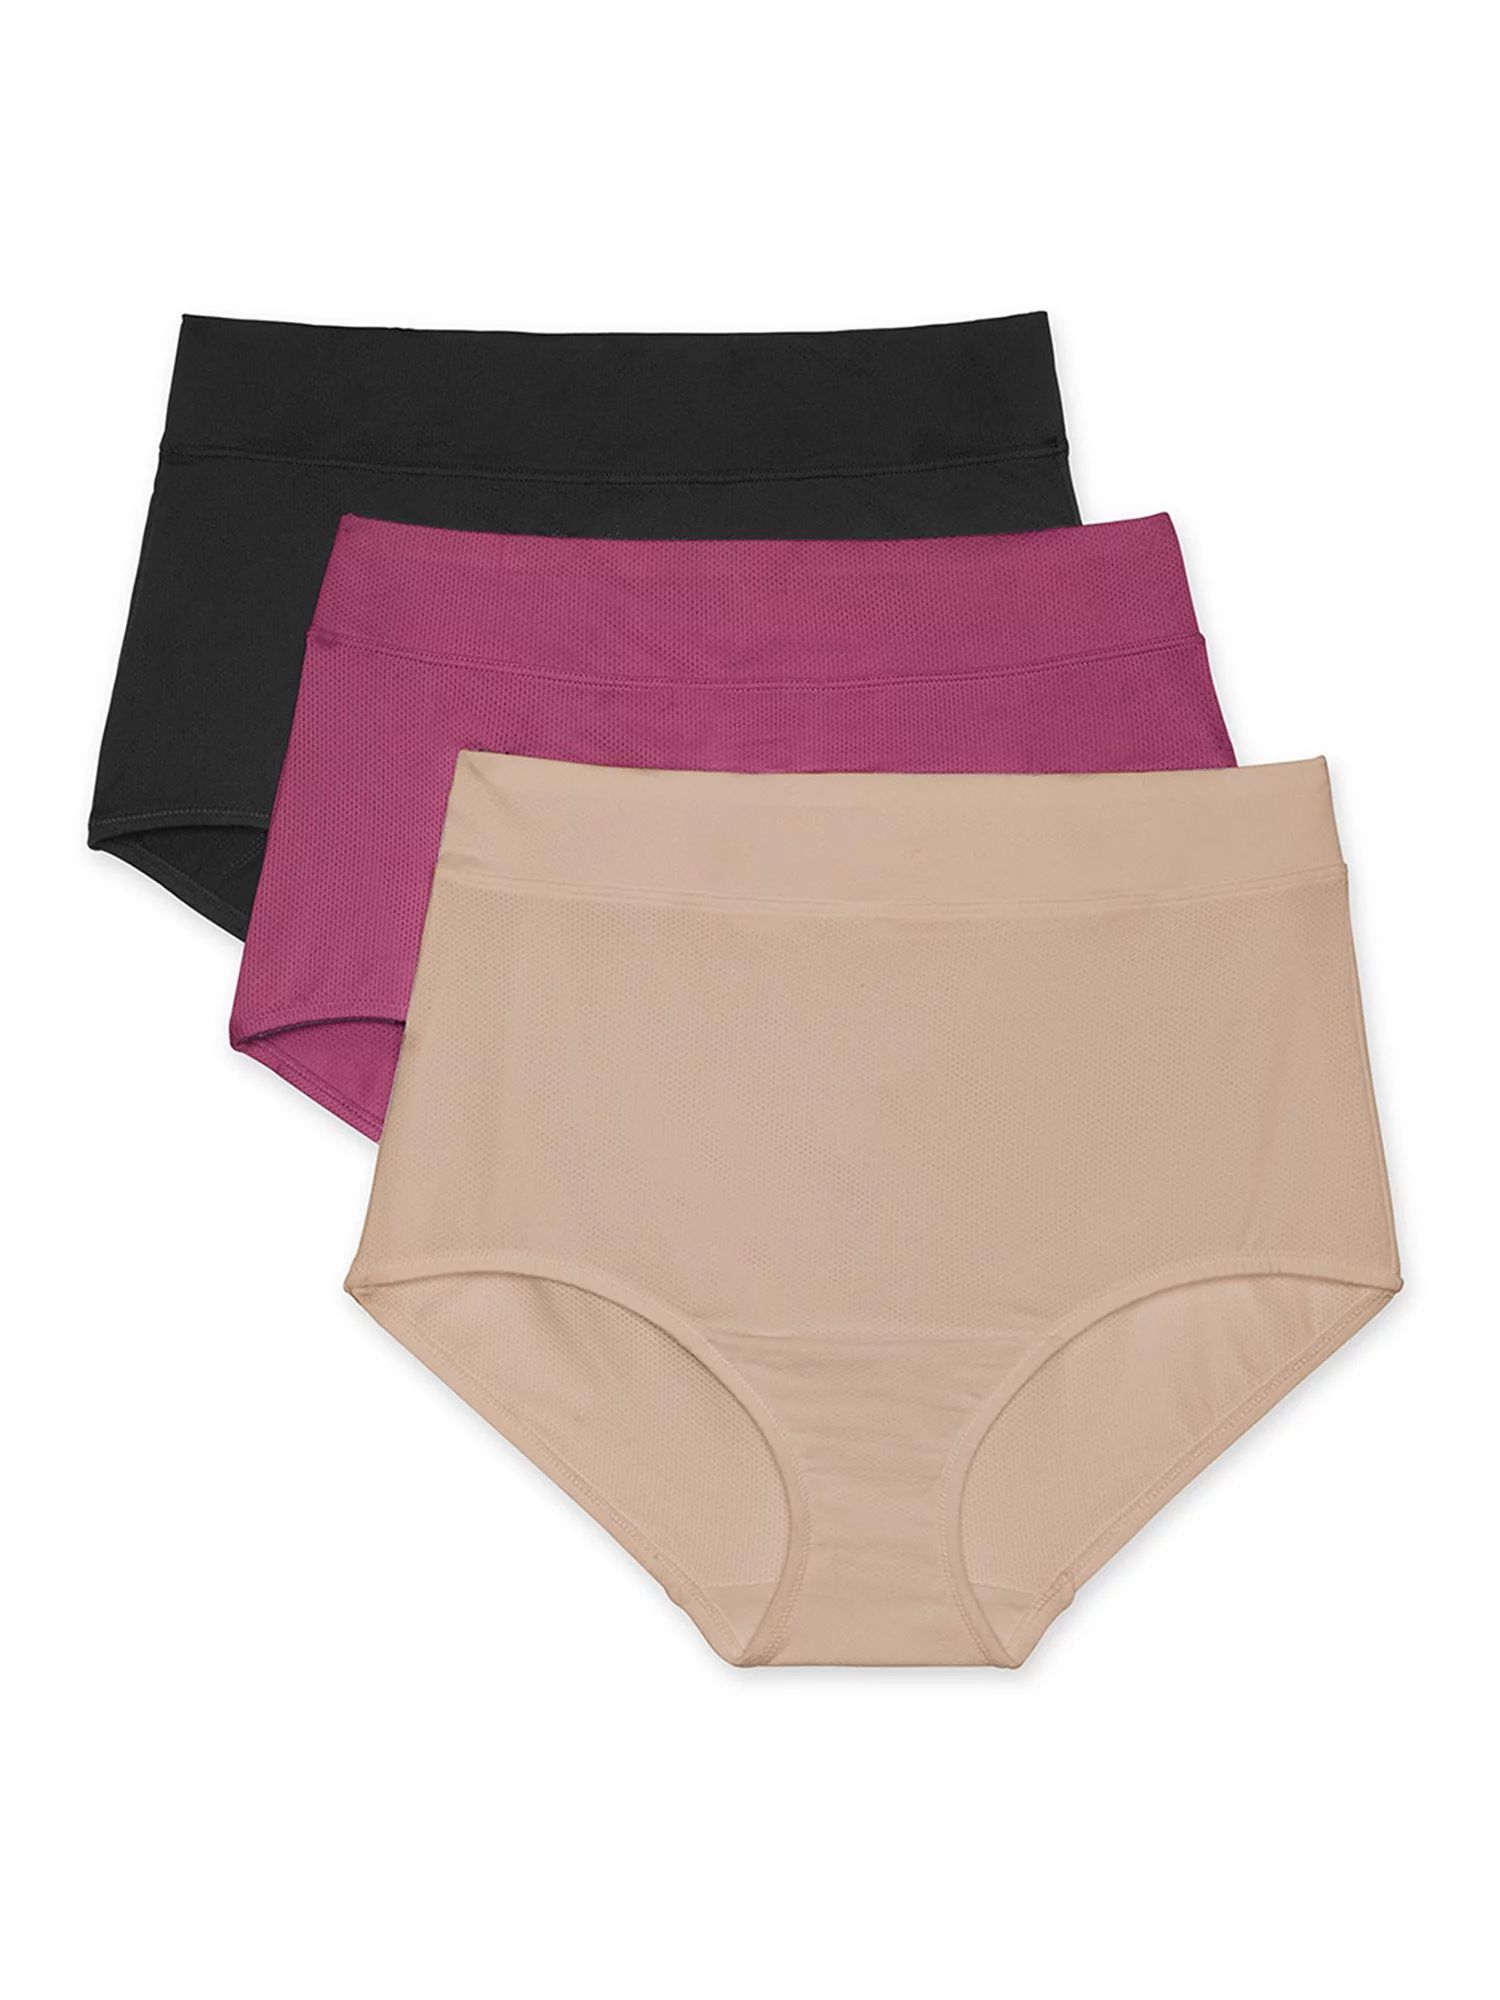 Blissful Benefits by Warner'sÂ® Women's No Muffin Top Micro Breathable Brief, 3-Pack | Walmart (US)